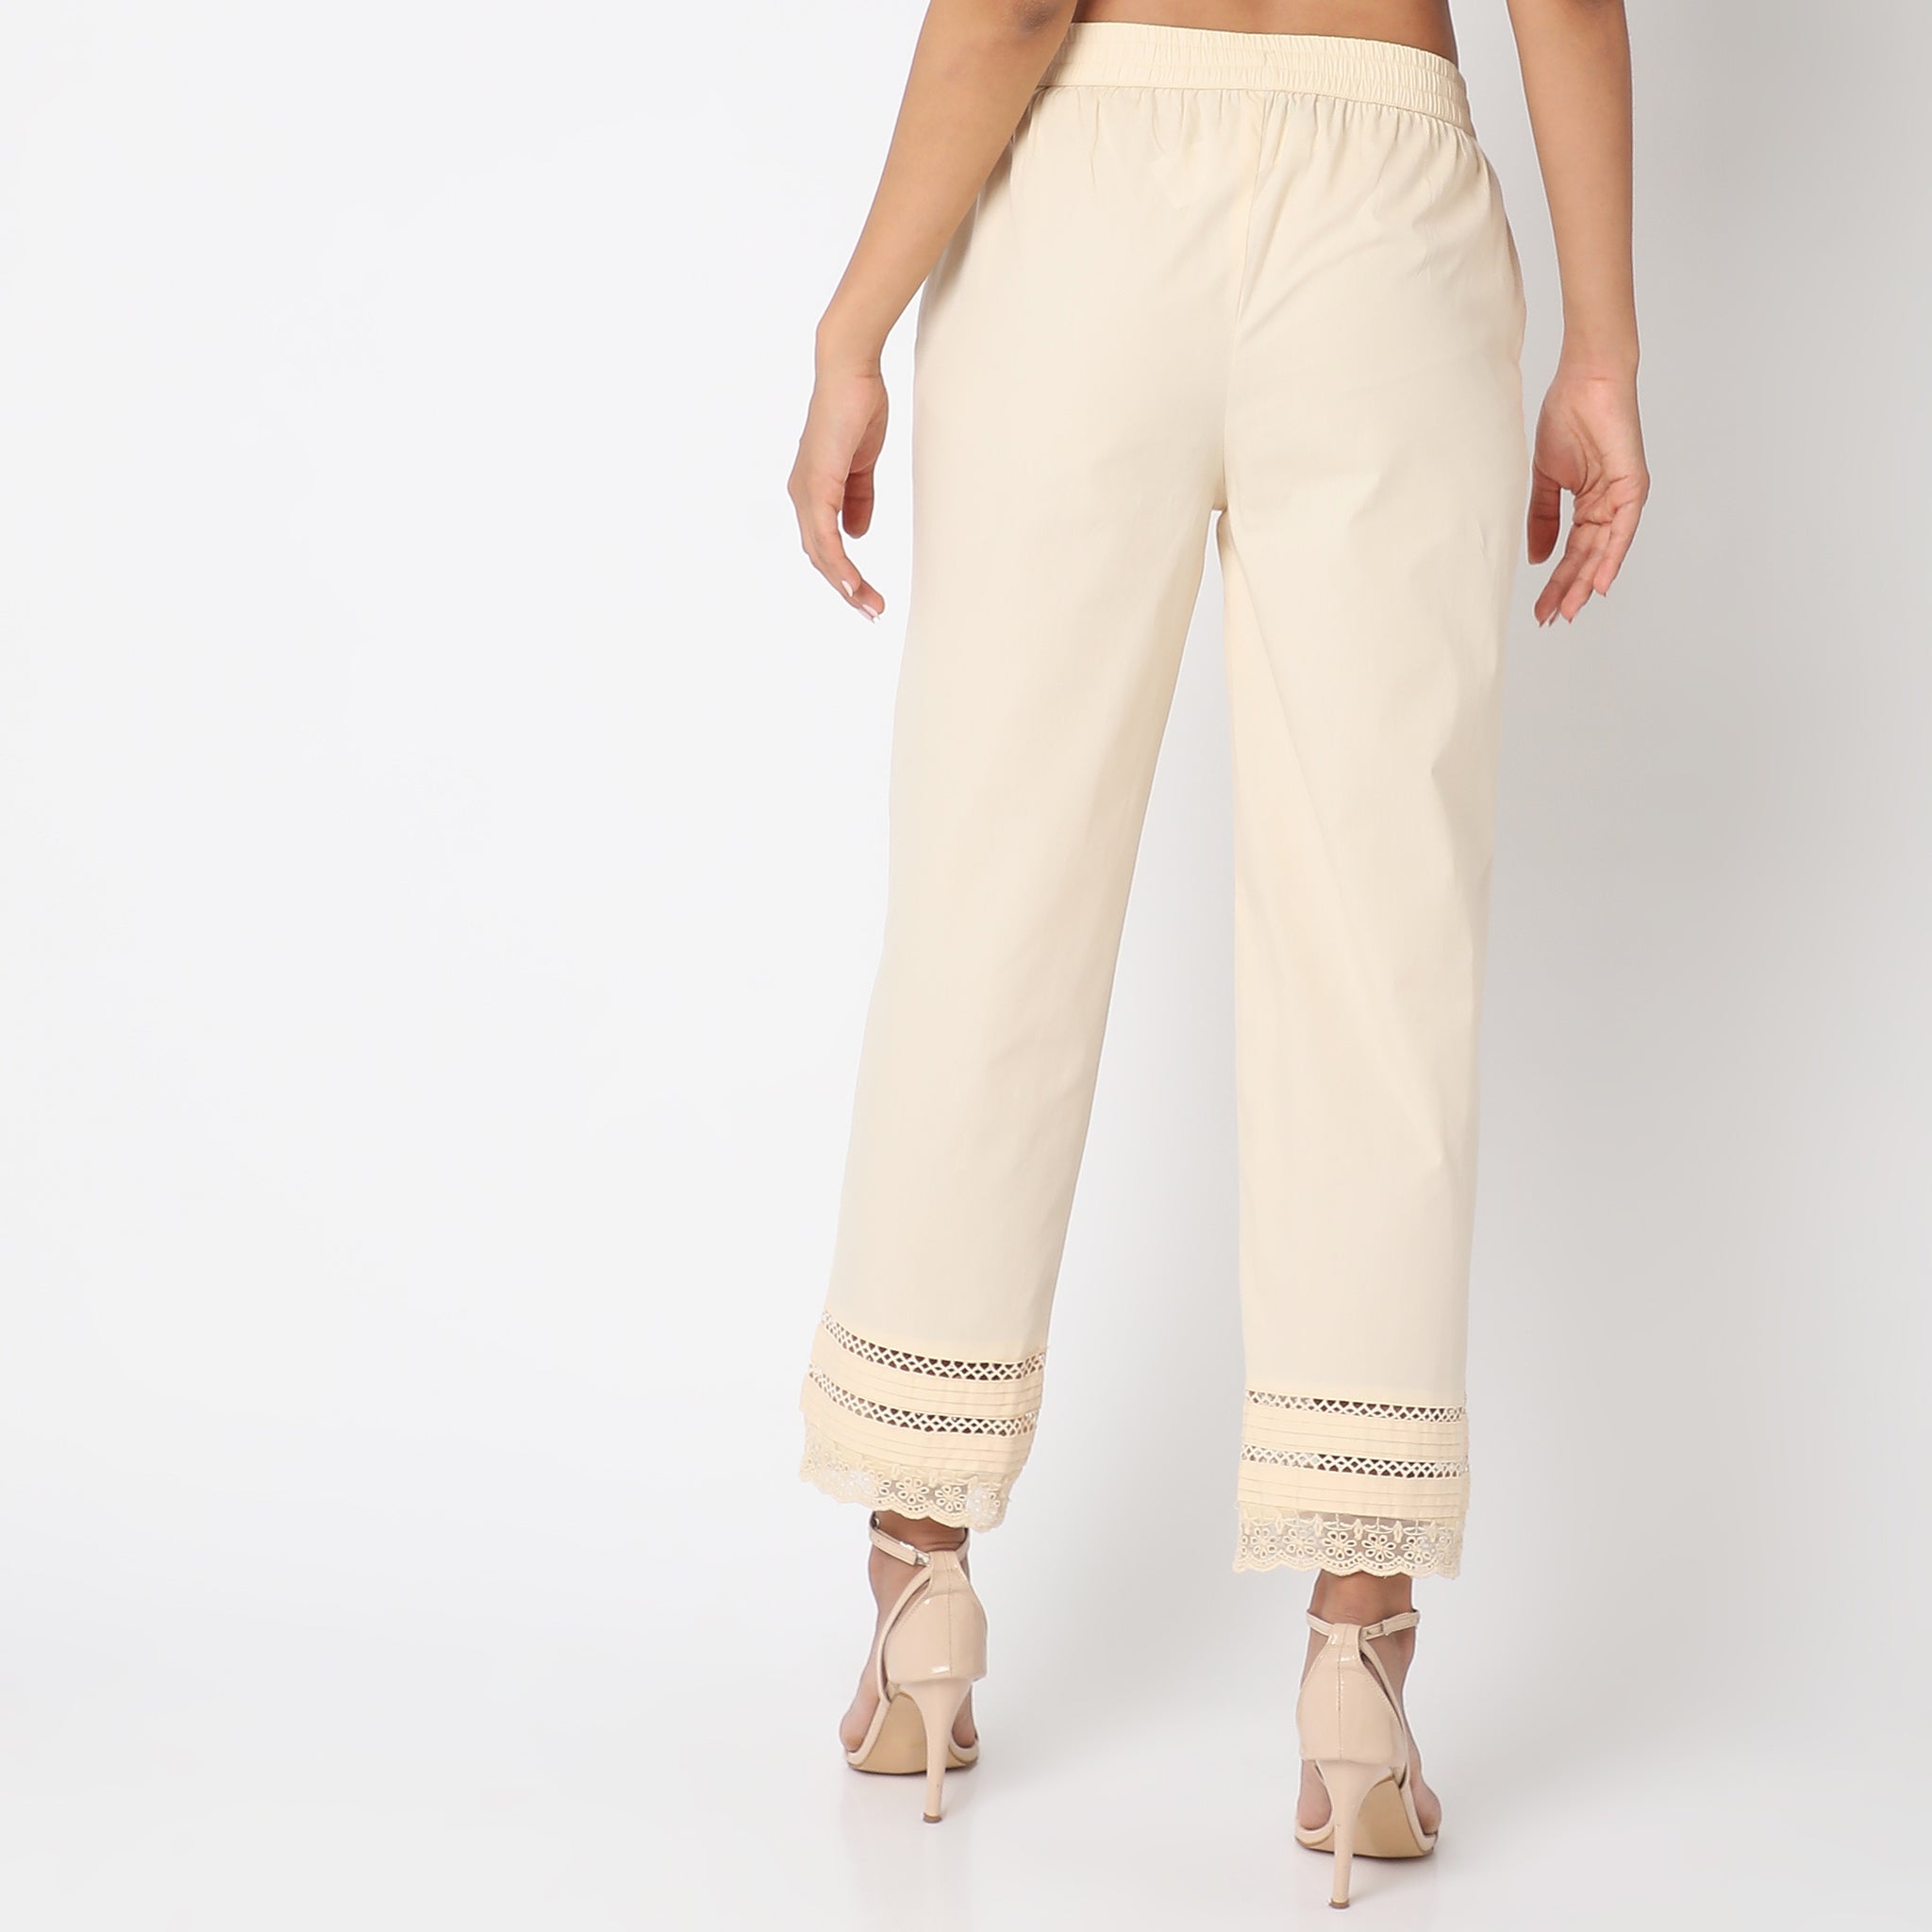 W4U Palazzo Pants Ladies Fancy Cotton Pant at Rs 300/piece in Ahmedabad |  ID: 23496579462